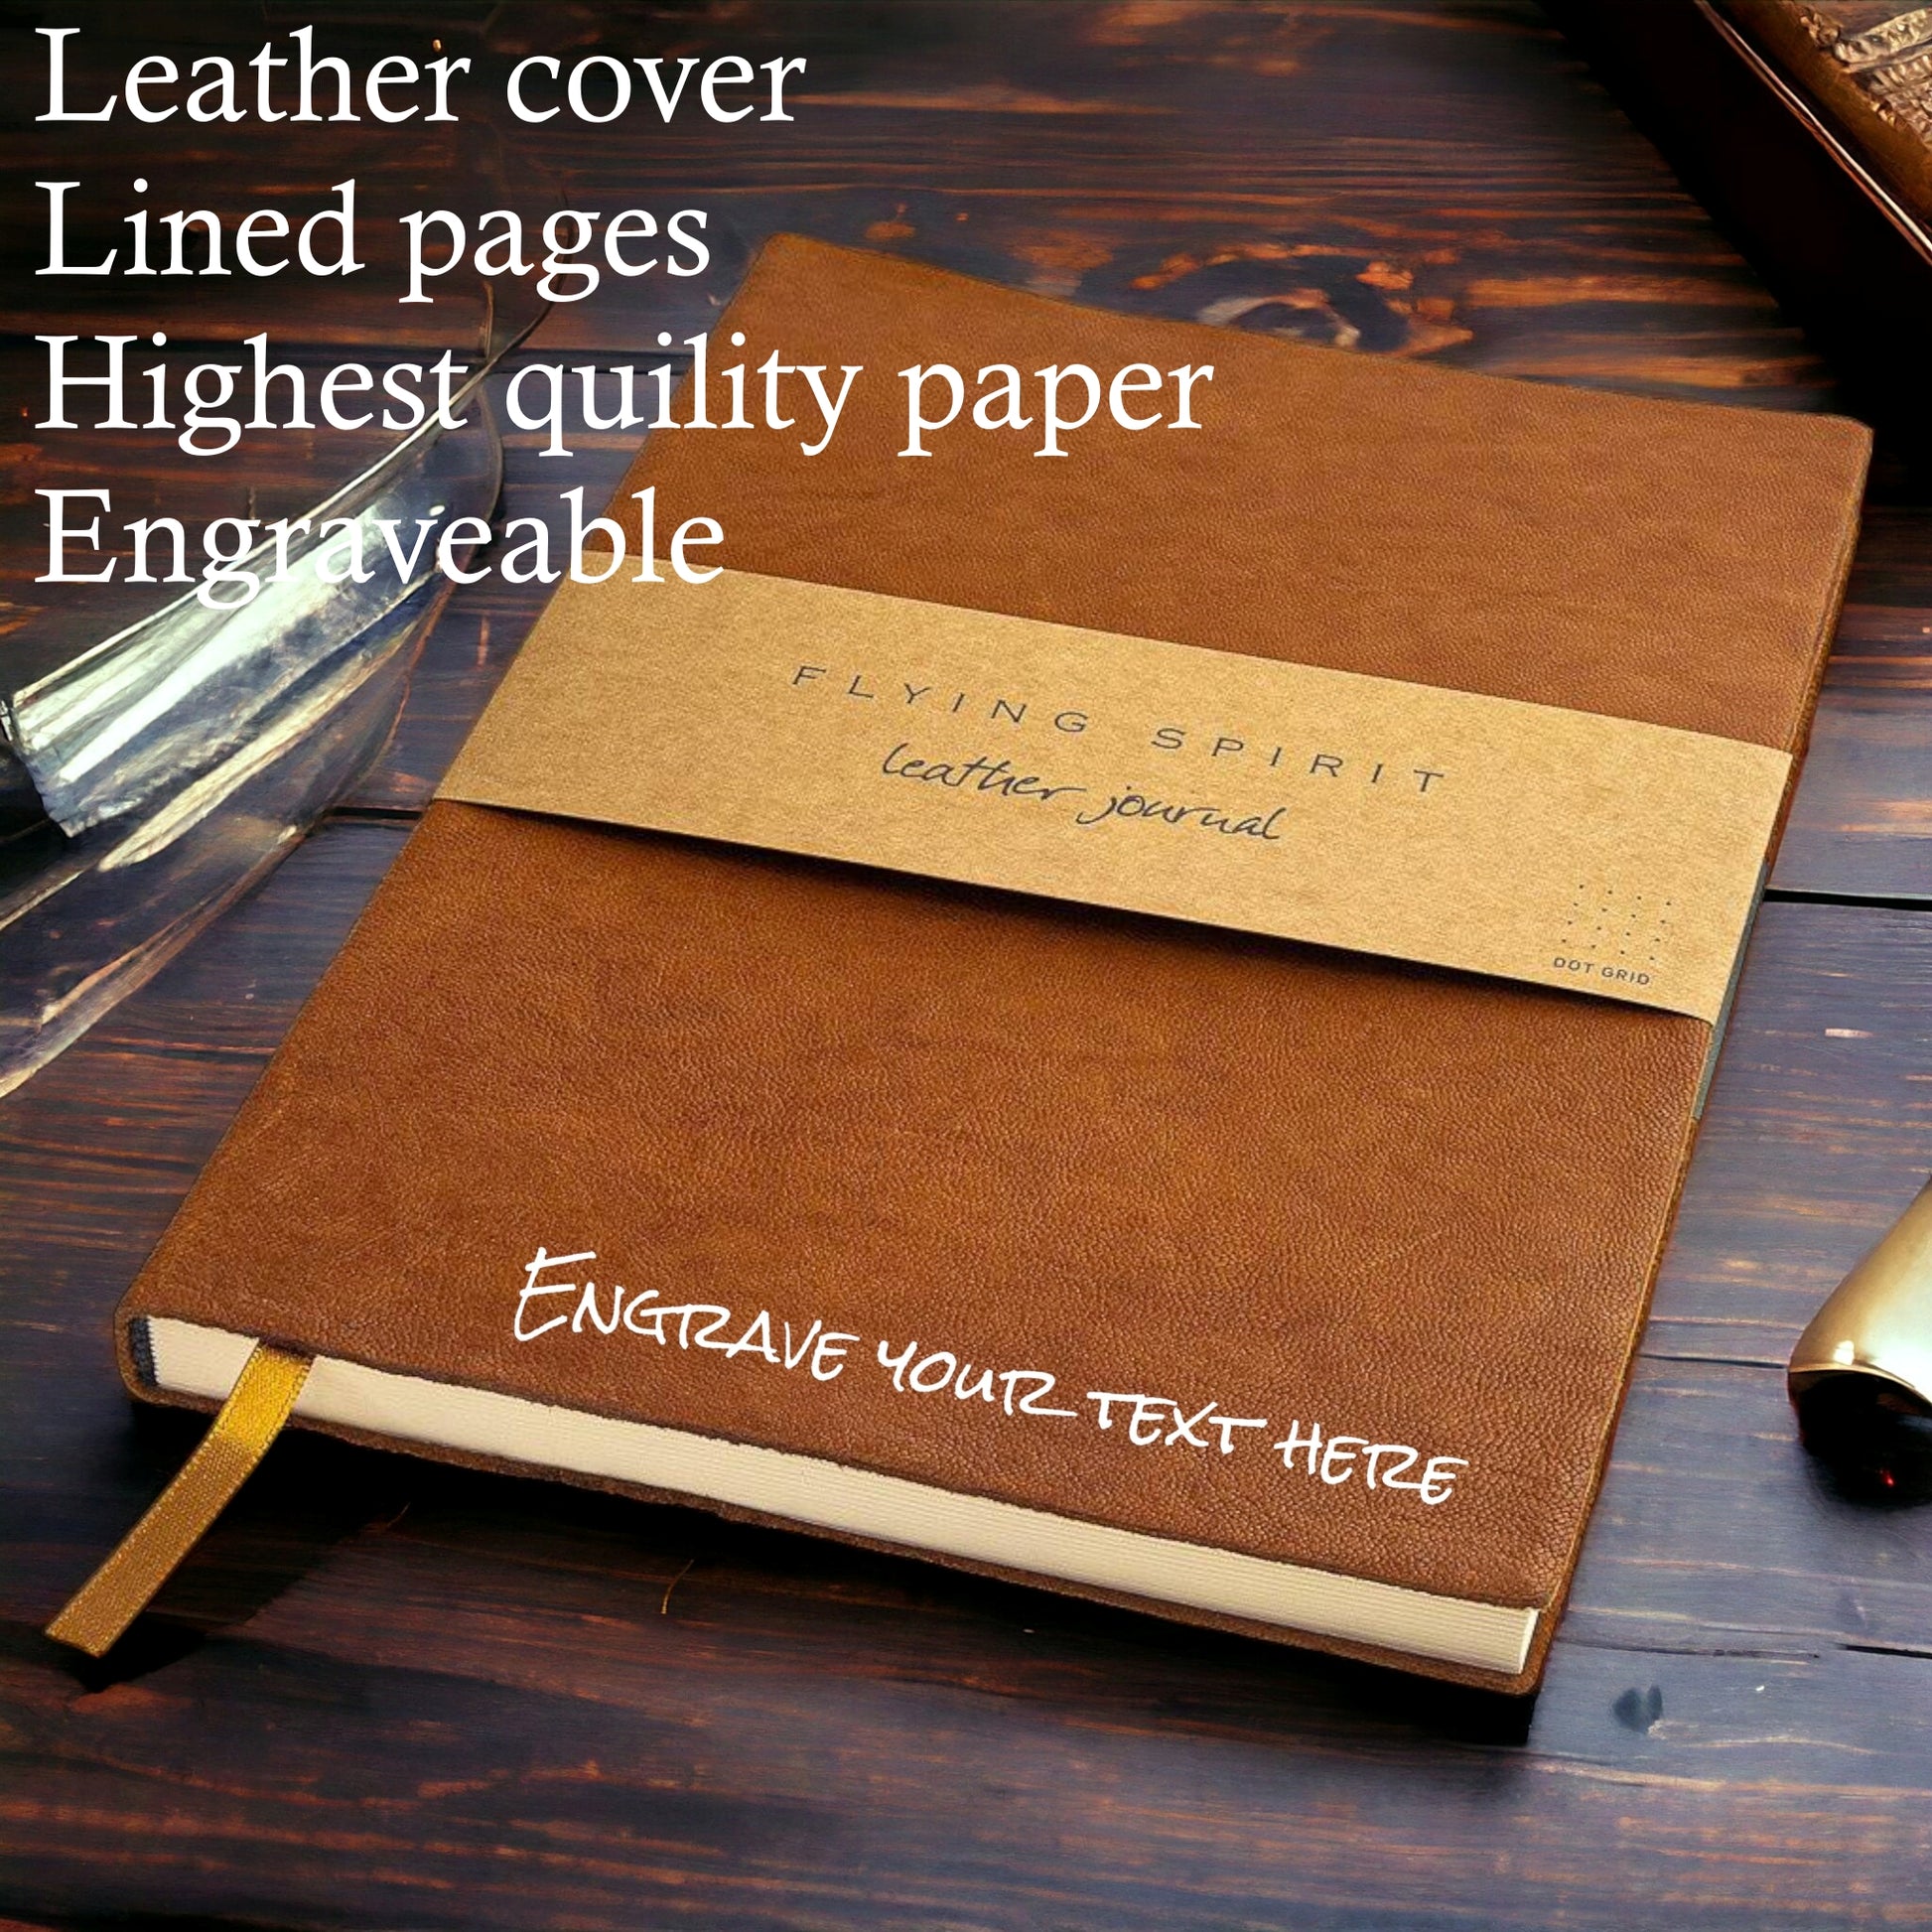 Engraved leather bound journal by Irish Pens